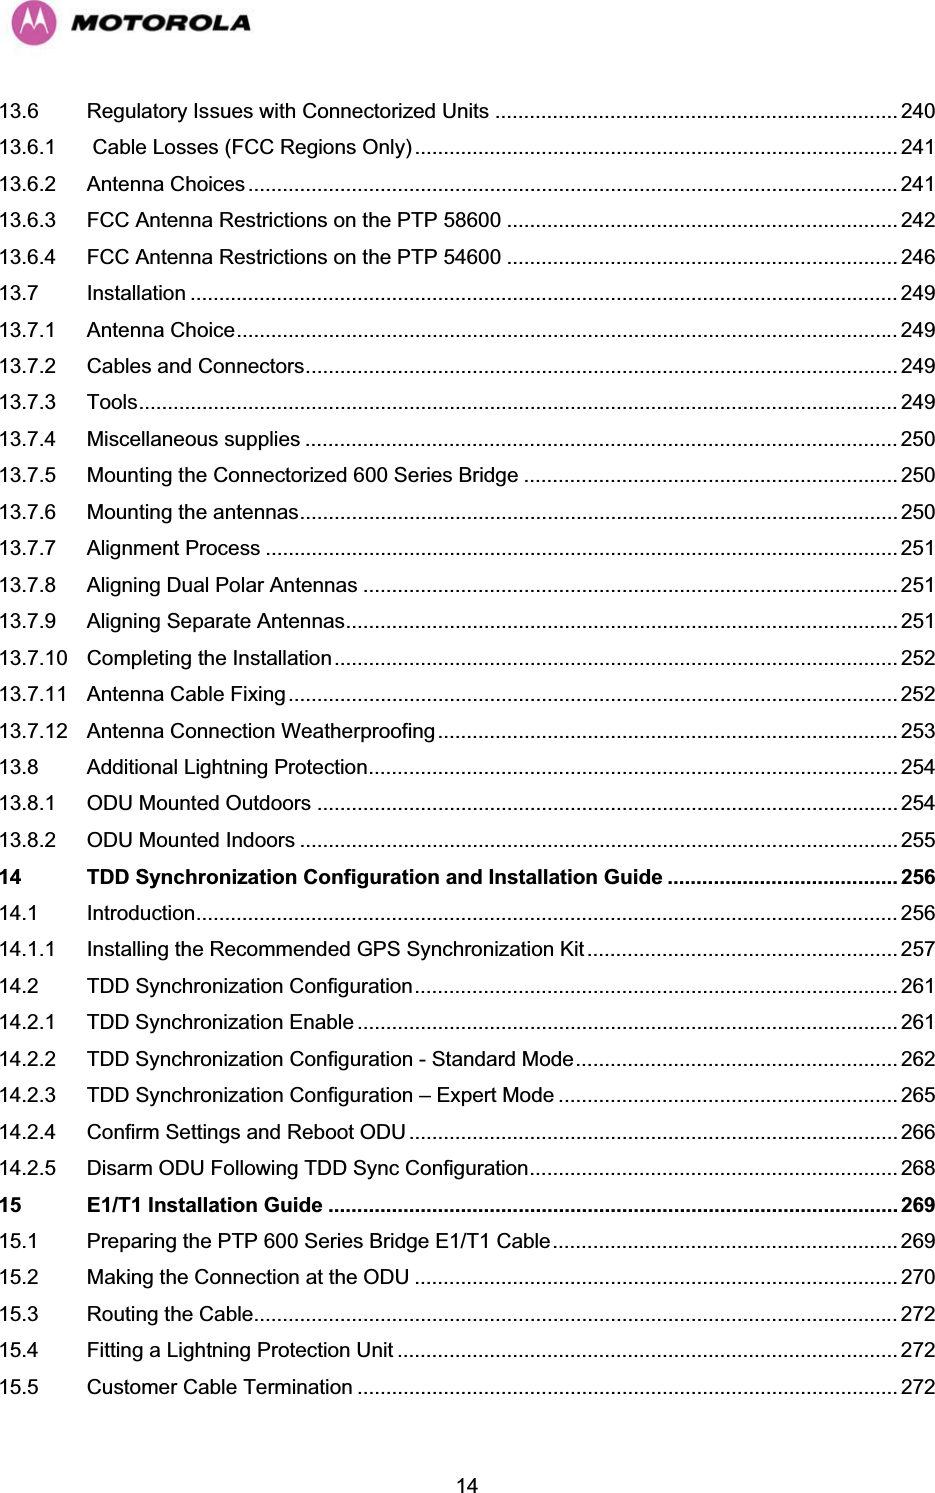   1413.6 Regulatory Issues with Connectorized Units ...................................................................... 240 13.6.1  Cable Losses (FCC Regions Only) .................................................................................... 241 13.6.2 Antenna Choices ................................................................................................................. 241 13.6.3 FCC Antenna Restrictions on the PTP 58600 .................................................................... 242 13.6.4 FCC Antenna Restrictions on the PTP 54600 .................................................................... 246 13.7 Installation ........................................................................................................................... 249 13.7.1 Antenna Choice................................................................................................................... 249 13.7.2 Cables and Connectors....................................................................................................... 249 13.7.3 Tools.................................................................................................................................... 249 13.7.4 Miscellaneous supplies ....................................................................................................... 250 13.7.5 Mounting the Connectorized 600 Series Bridge ................................................................. 250 13.7.6 Mounting the antennas........................................................................................................ 250 13.7.7 Alignment Process .............................................................................................................. 251 13.7.8 Aligning Dual Polar Antennas ............................................................................................. 251 13.7.9 Aligning Separate Antennas................................................................................................ 251 13.7.10 Completing the Installation.................................................................................................. 252 13.7.11 Antenna Cable Fixing .......................................................................................................... 252 13.7.12 Antenna Connection Weatherproofing ................................................................................ 253 13.8 Additional Lightning Protection............................................................................................ 254 13.8.1 ODU Mounted Outdoors ..................................................................................................... 254 13.8.2 ODU Mounted Indoors ........................................................................................................ 255 14 TDD Synchronization Configuration and Installation Guide ........................................ 256 14.1 Introduction.......................................................................................................................... 256 14.1.1 Installing the Recommended GPS Synchronization Kit...................................................... 257 14.2 TDD Synchronization Configuration.................................................................................... 261 14.2.1 TDD Synchronization Enable .............................................................................................. 261 14.2.2 TDD Synchronization Configuration - Standard Mode........................................................ 262 14.2.3 TDD Synchronization Configuration – Expert Mode ........................................................... 265 14.2.4 Confirm Settings and Reboot ODU ..................................................................................... 266 14.2.5 Disarm ODU Following TDD Sync Configuration................................................................ 268 15 E1/T1 Installation Guide ................................................................................................... 269 15.1 Preparing the PTP 600 Series Bridge E1/T1 Cable............................................................ 269 15.2 Making the Connection at the ODU .................................................................................... 270 15.3 Routing the Cable................................................................................................................ 272 15.4 Fitting a Lightning Protection Unit ....................................................................................... 272 15.5 Customer Cable Termination .............................................................................................. 272 